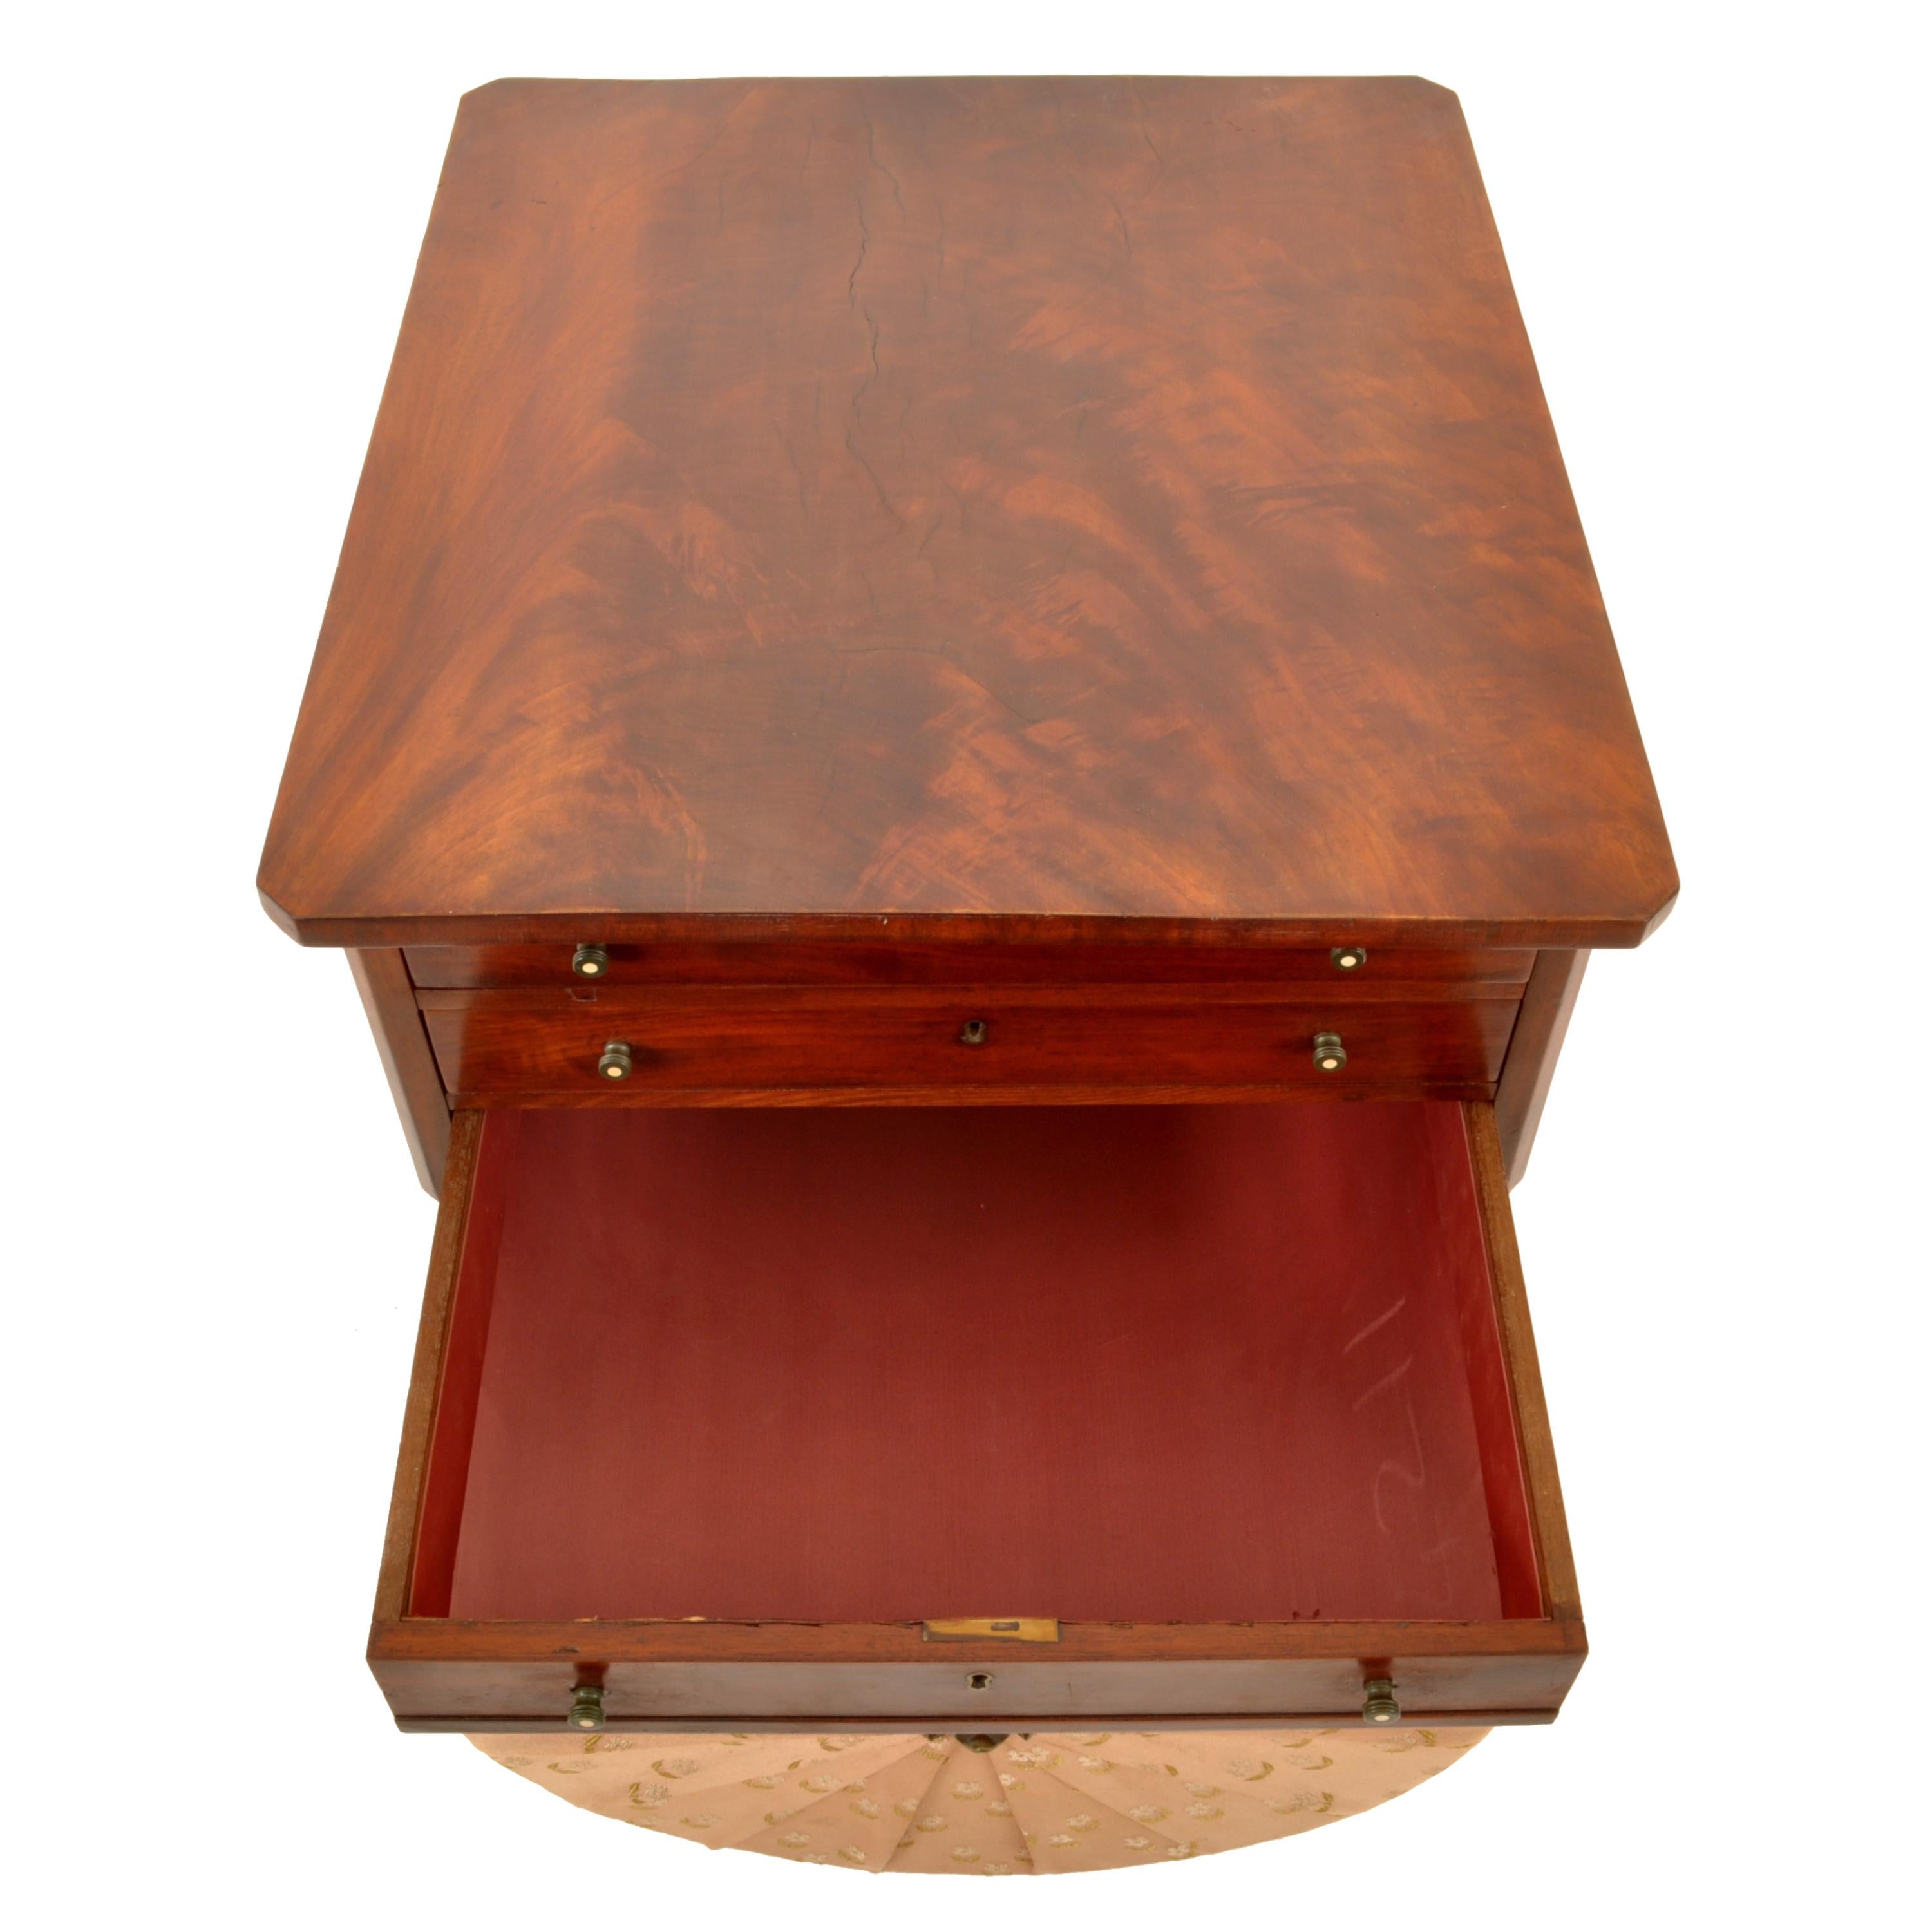 Antique American Empire Mahogany Pedestal Sewing Work Table New York Circa 1840 For Sale 6